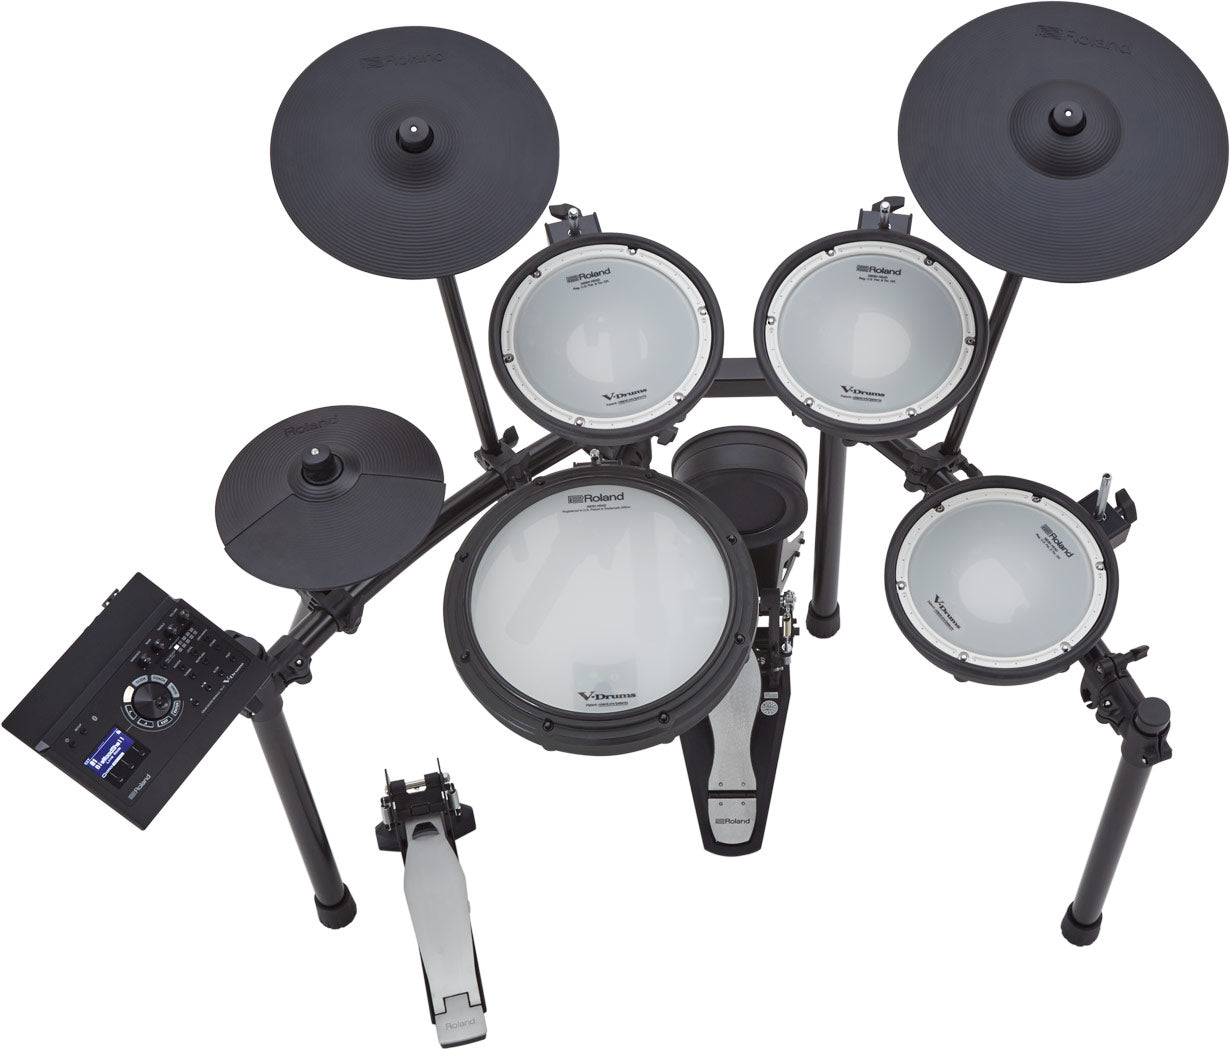 Roland TD-17KV2 E-Drum Set 2 Pieces new in box with Pearl P-930 Pedal